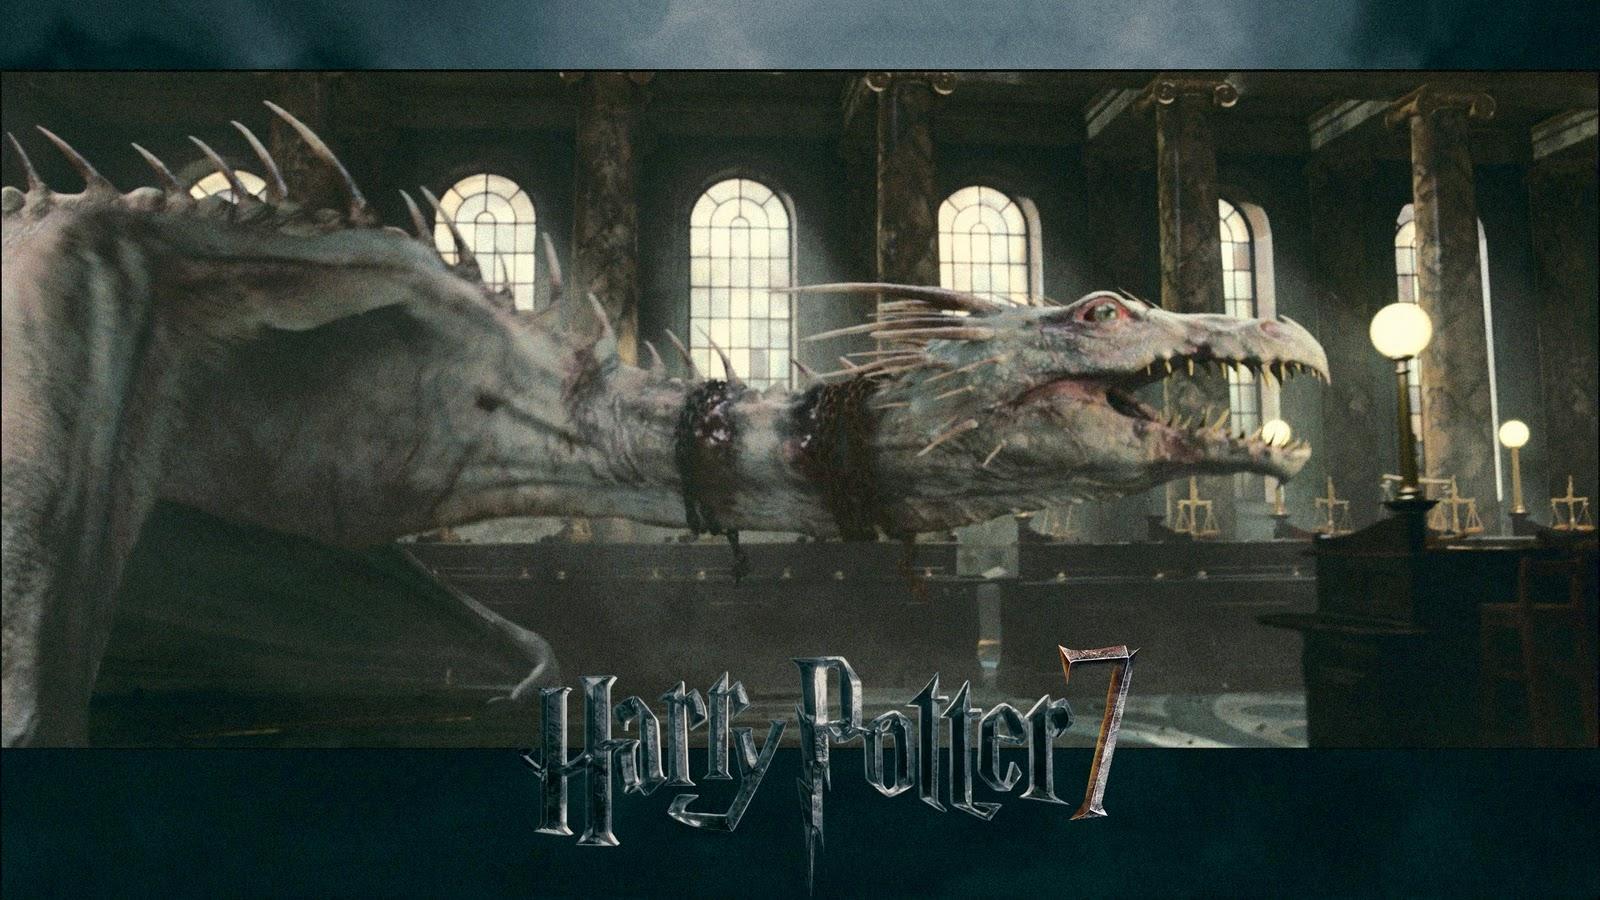 Strictly Wallpaper: Harry Potter And The Deathly Hallows Wallpaper